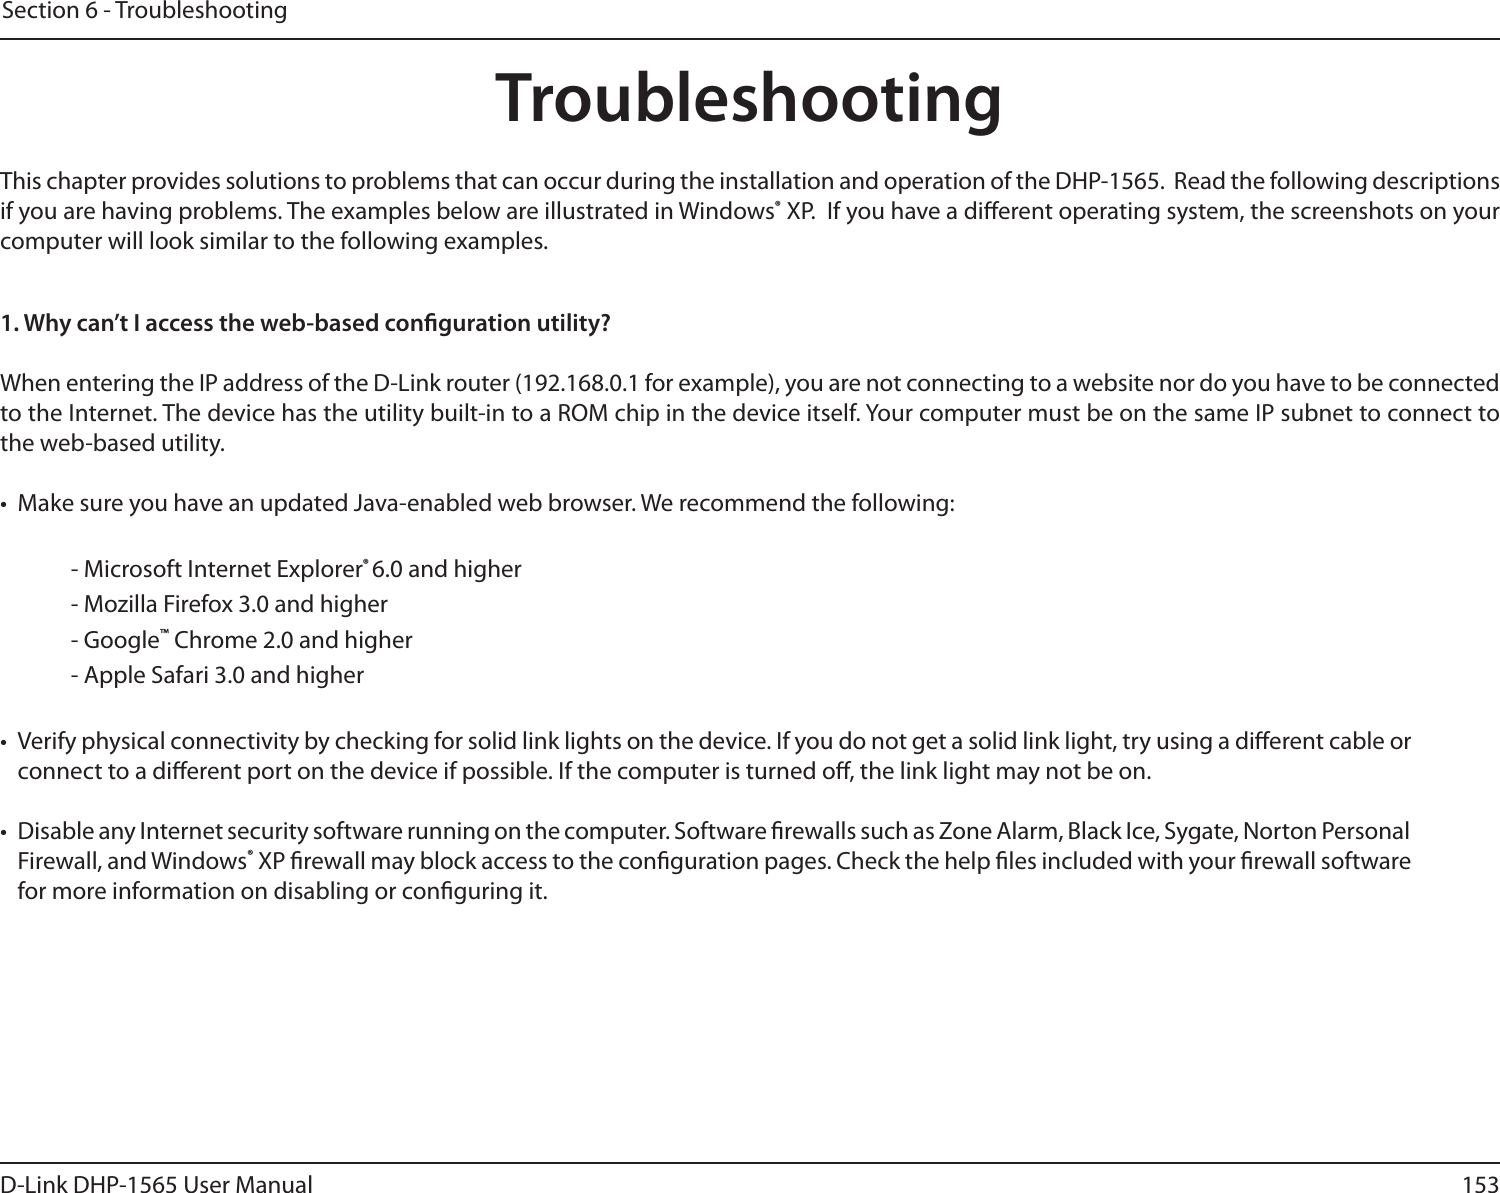 153D-Link DHP-1565 User ManualSection 6 - TroubleshootingTroubleshootingThis chapter provides solutions to problems that can occur during the installation and operation of the DHP-1565.  Read the following descriptions if you are having problems. The examples below are illustrated in Windows® XP.  If you have a dierent operating system, the screenshots on your computer will look similar to the following examples.1. Why can’t I access the web-based conguration utility?When entering the IP address of the D-Link router (192.168.0.1 for example), you are not connecting to a website nor do you have to be connected to the Internet. The device has the utility built-in to a ROM chip in the device itself. Your computer must be on the same IP subnet to connect to the web-based utility. •  Make sure you have an updated Java-enabled web browser. We recommend the following:  - Microsoft Internet Explorer® 6.0 and higher- Mozilla Firefox 3.0 and higher- Google™ Chrome 2.0 and higher- Apple Safari 3.0 and higher•  Verify physical connectivity by checking for solid link lights on the device. If you do not get a solid link light, try using a dierent cable or connect to a dierent port on the device if possible. If the computer is turned o, the link light may not be on.•  Disable any Internet security software running on the computer. Software rewalls such as Zone Alarm, Black Ice, Sygate, Norton Personal Firewall, and Windows® XP rewall may block access to the conguration pages. Check the help les included with your rewall software for more information on disabling or conguring it.